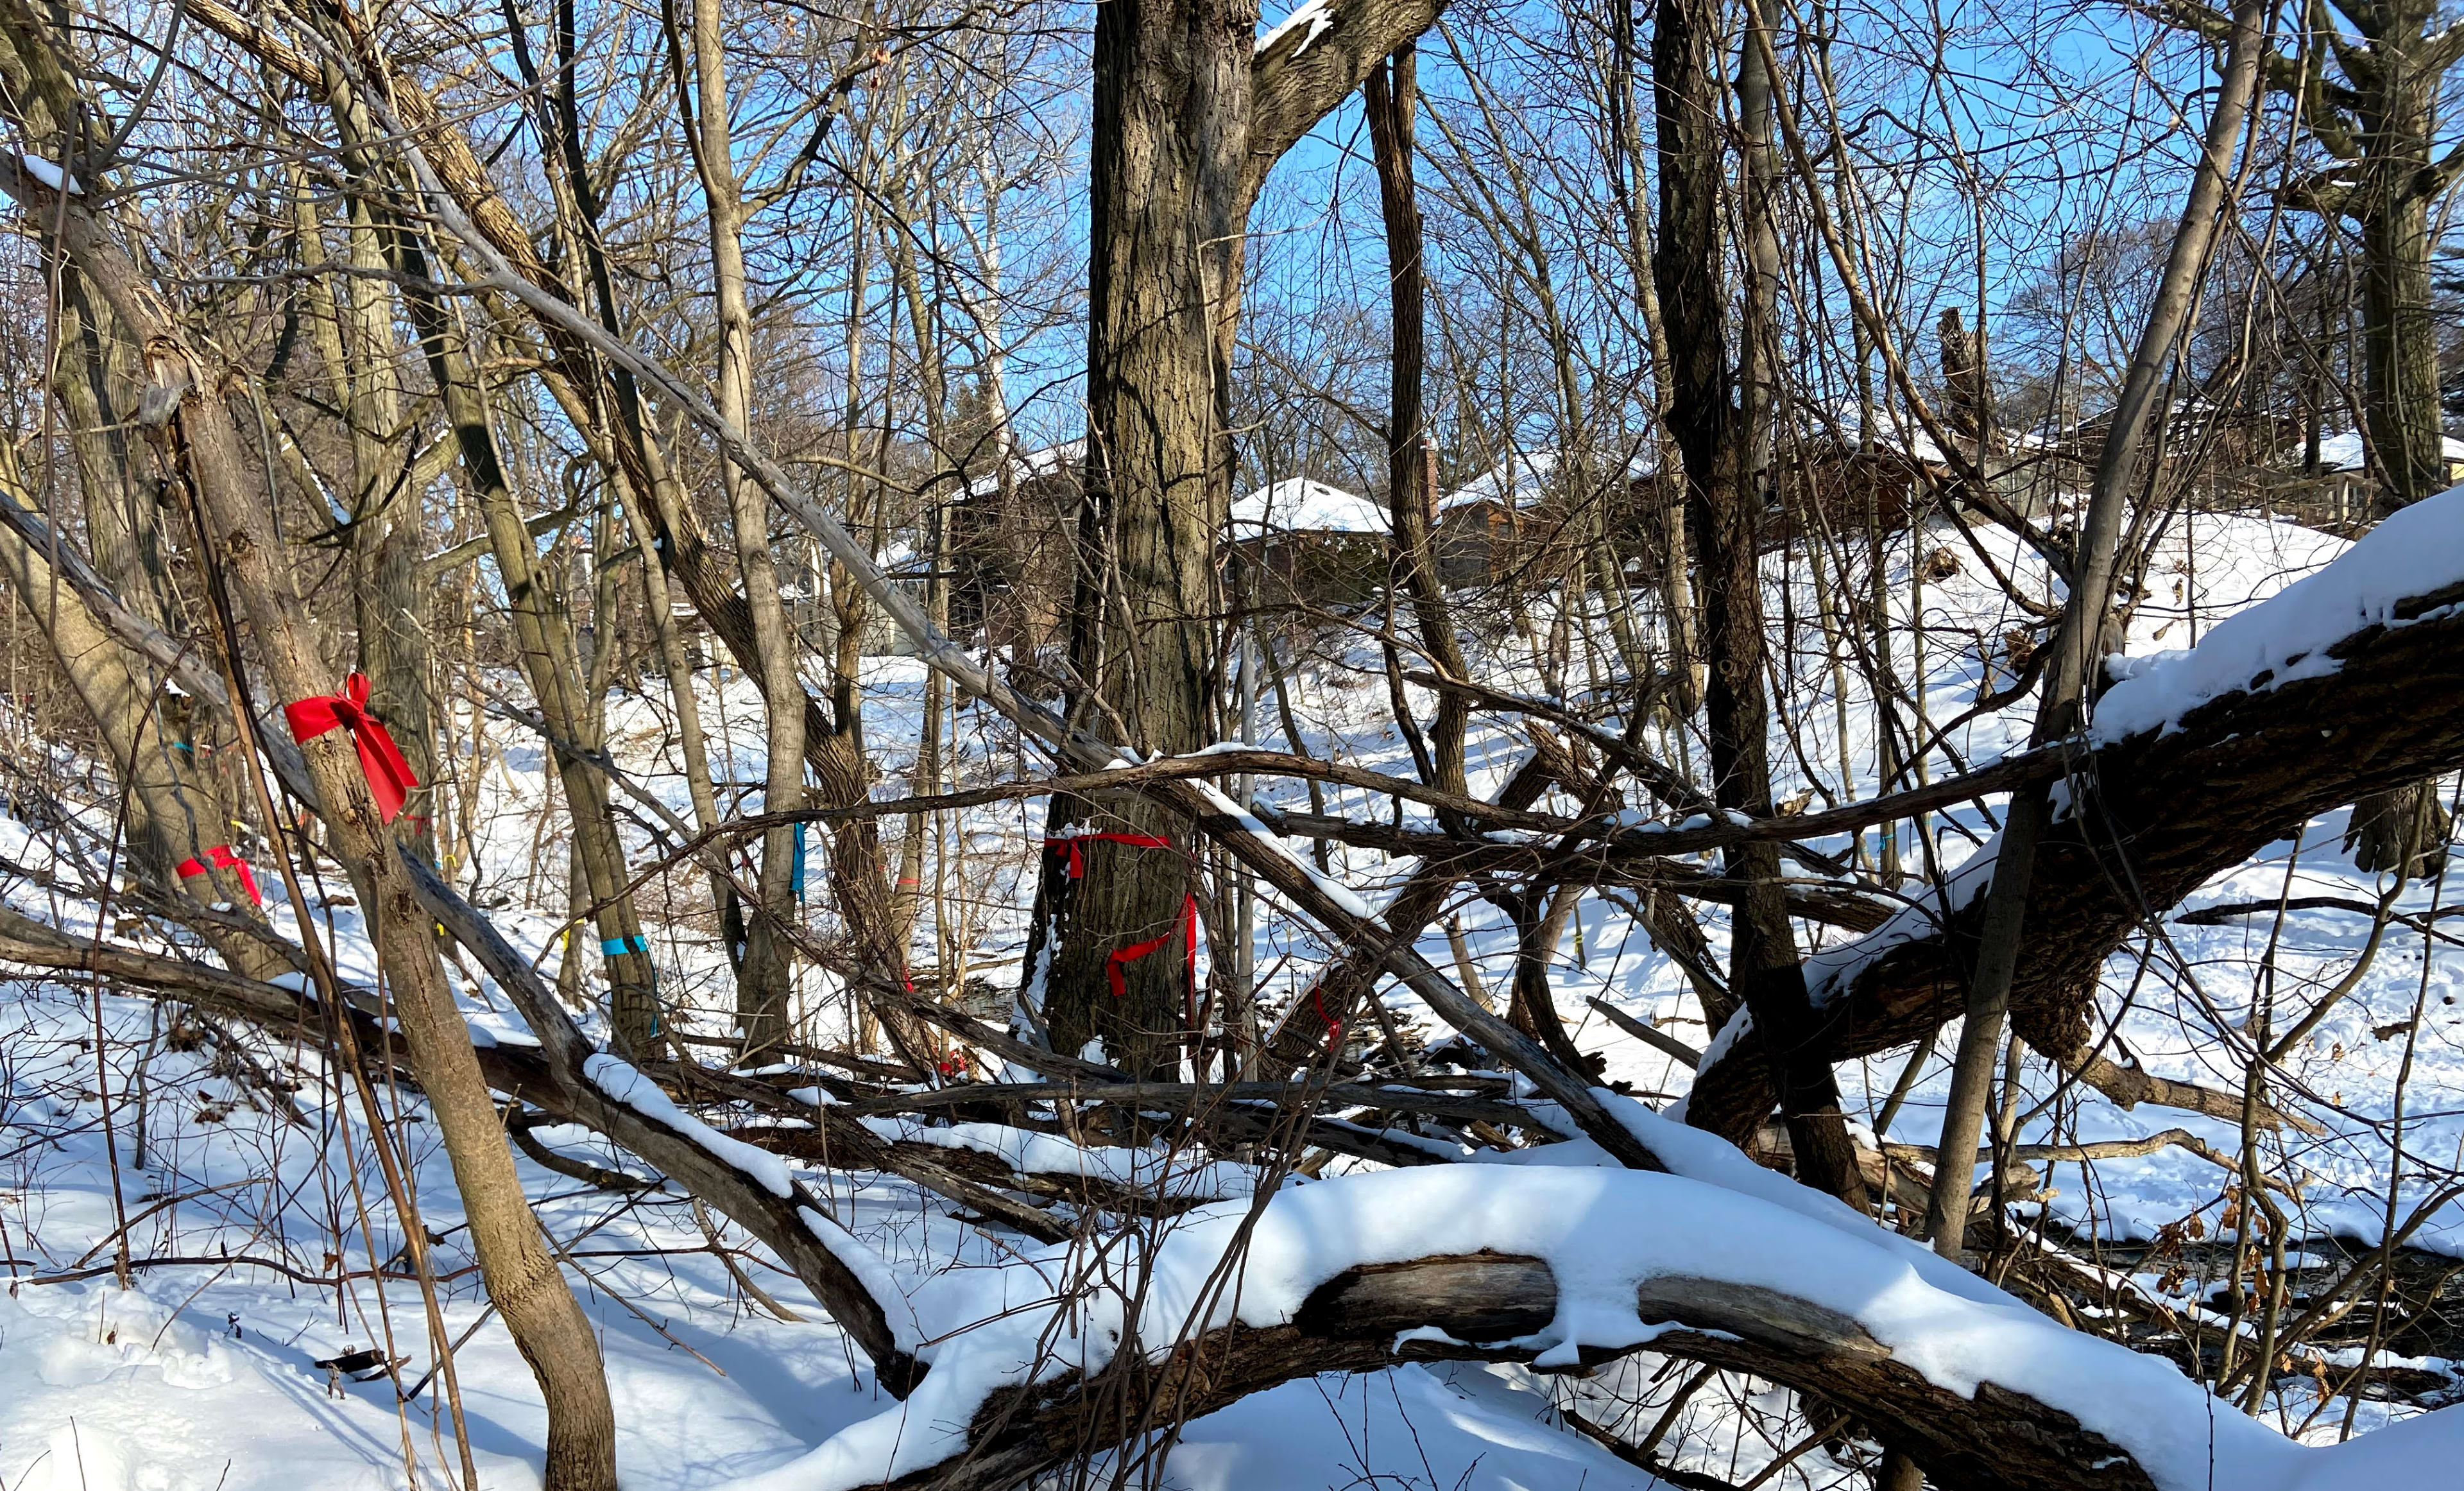 Trees in the small's creek ravine with snow covering much of the area